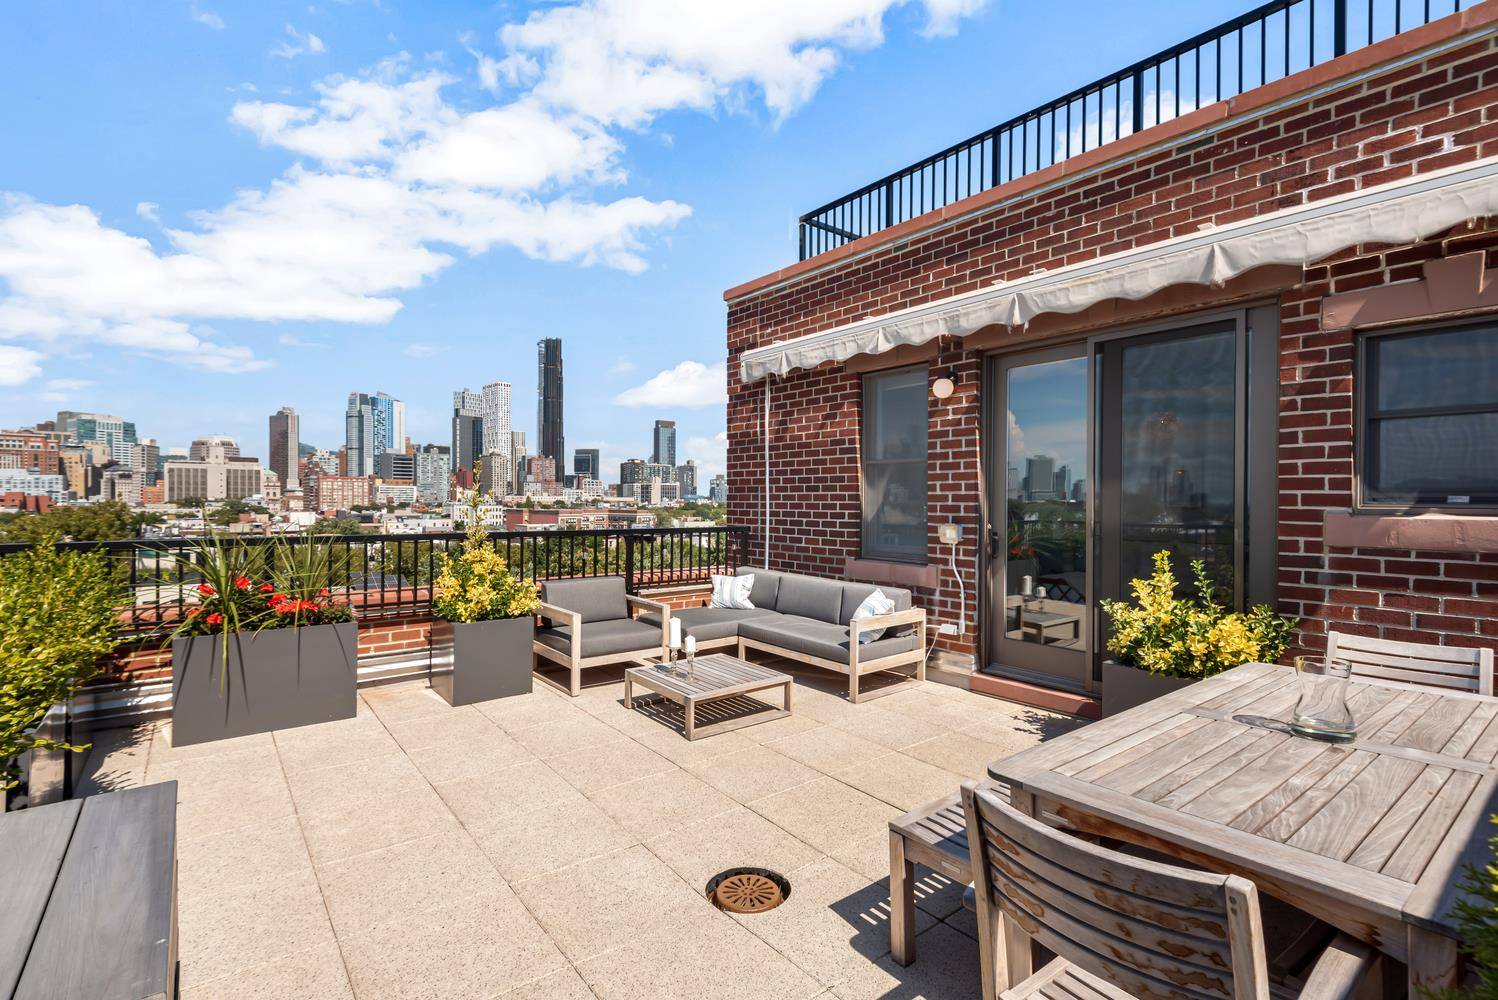 If you're seeking an ideal Cobble Hill location with stunning, unobscured Manhattan views, look no further !